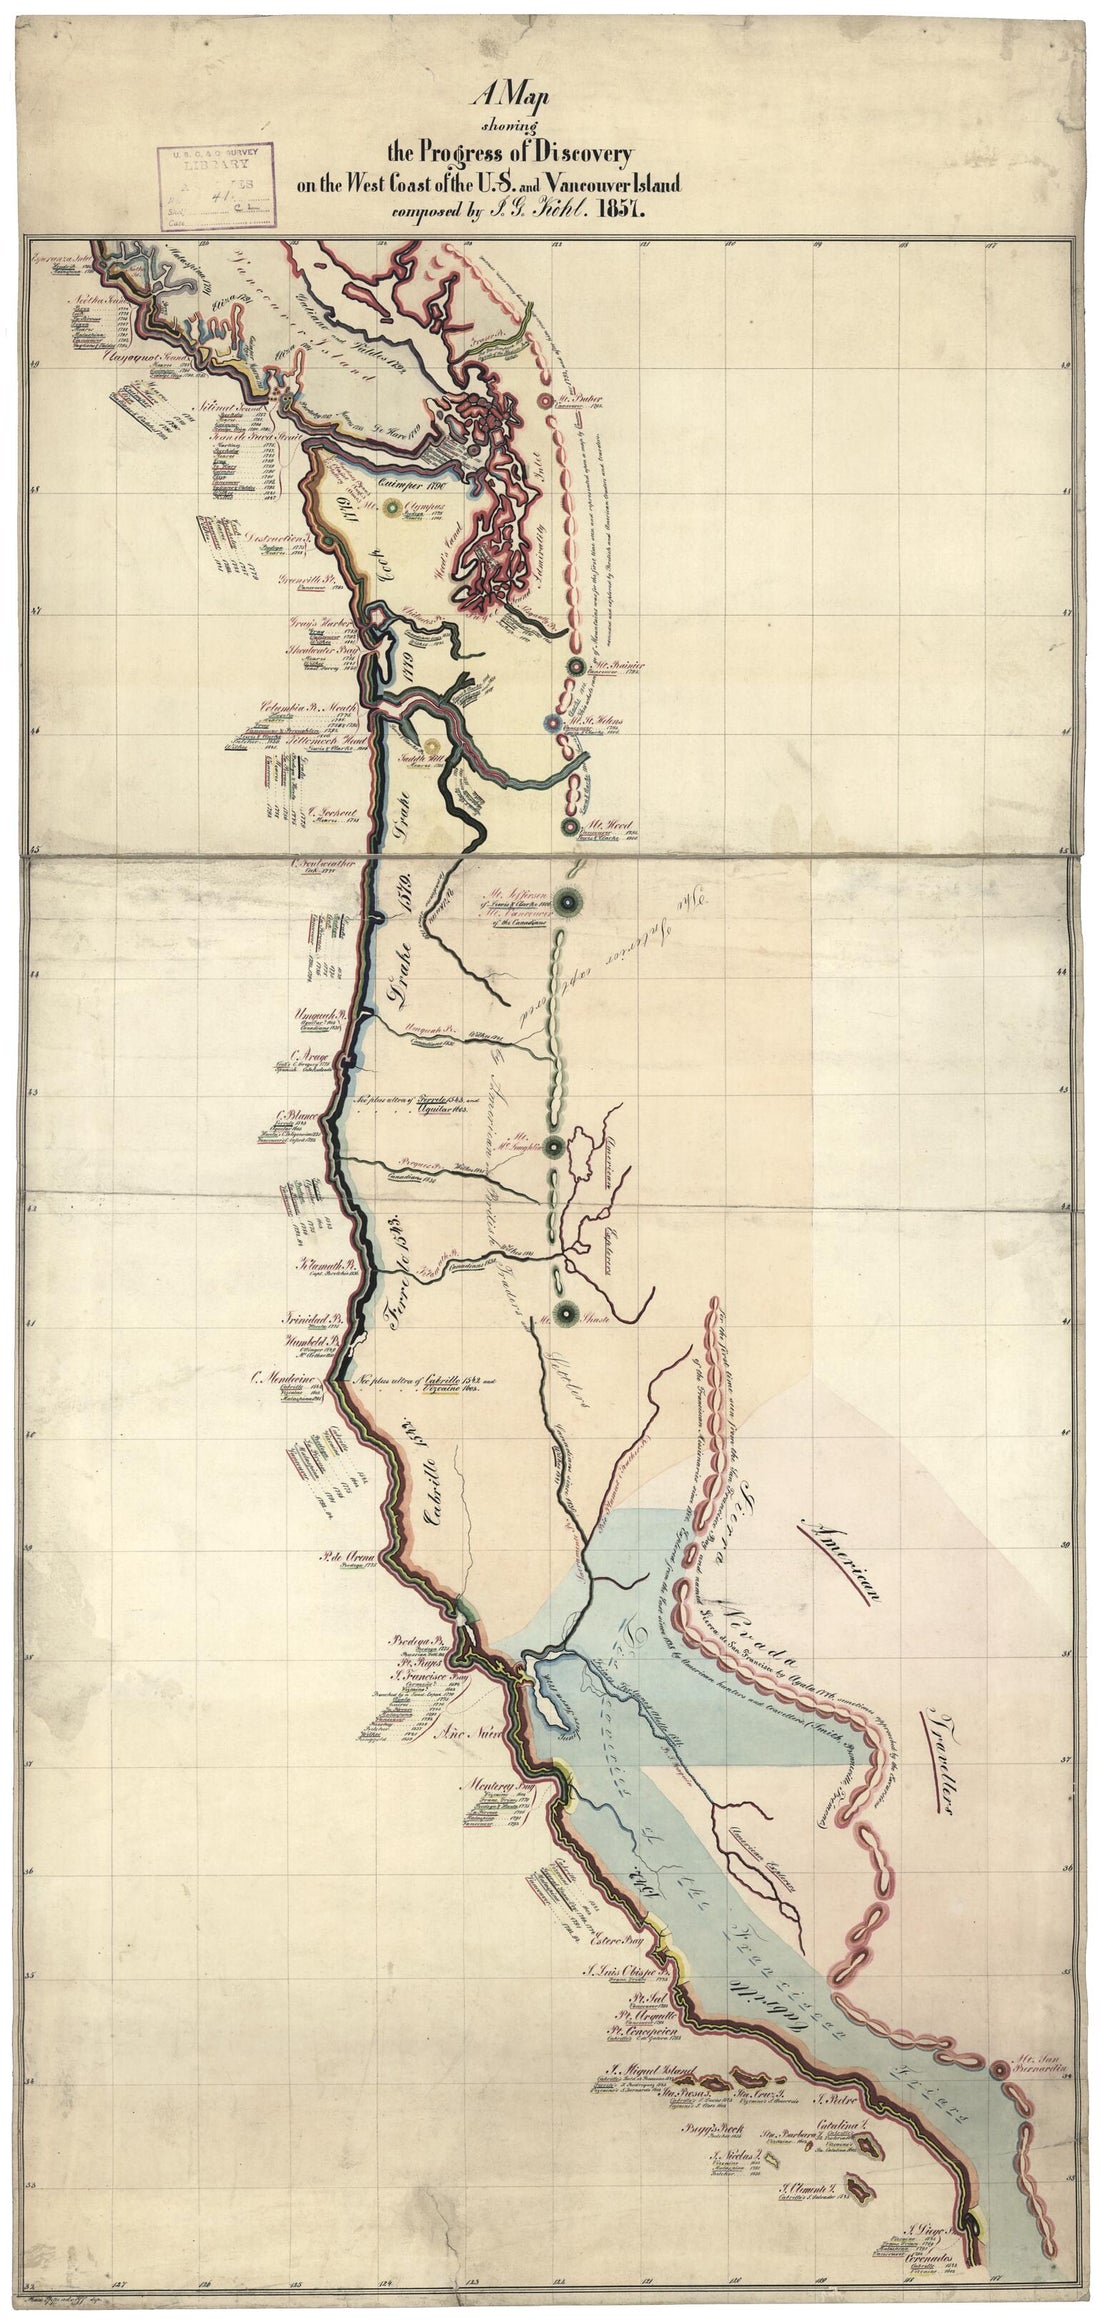 This old map of Map of the Discovery of the.. (Map of the Discovery of the East Coast of the United States, Map Showing the Progress of Discovery of the Gulf of Mexico, Map Showing the Progress of Discovery of the West Coast of the U.S. and Vancouver Isl